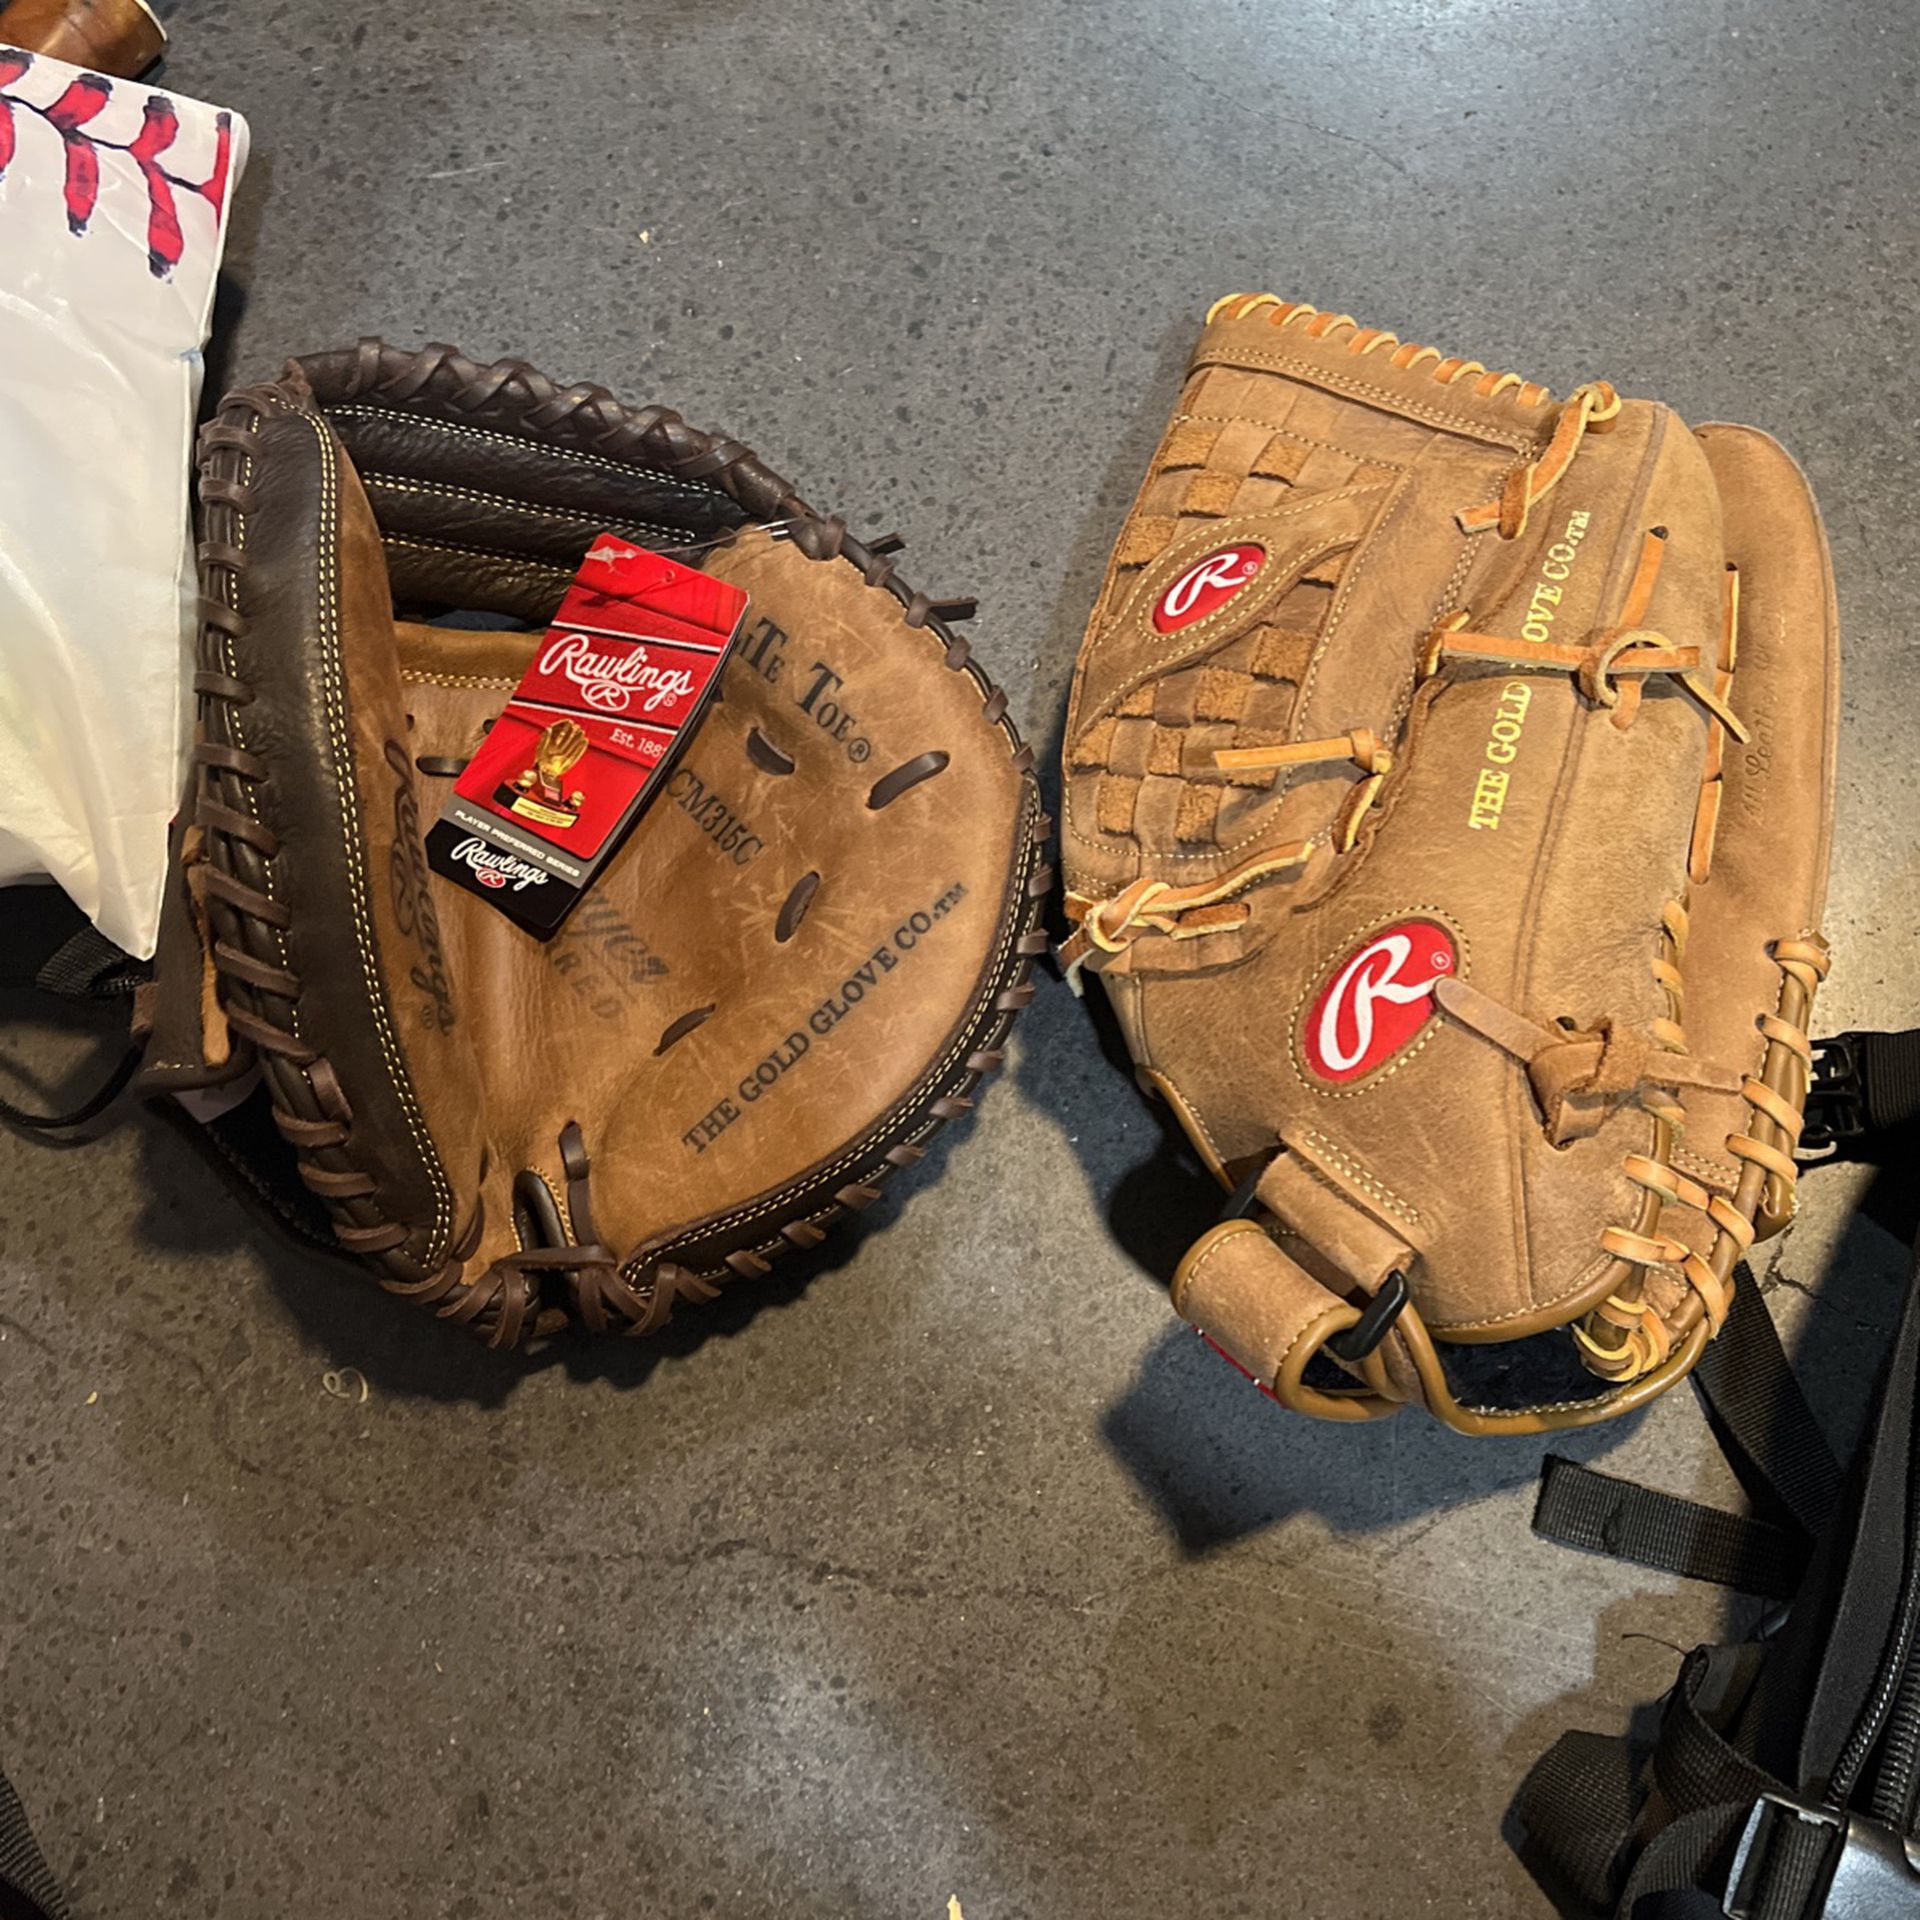 Baseball Gloves, One Catchers Glove Is A Youth Size 1 Regular Gloves A 13 Inch Very Good Condition